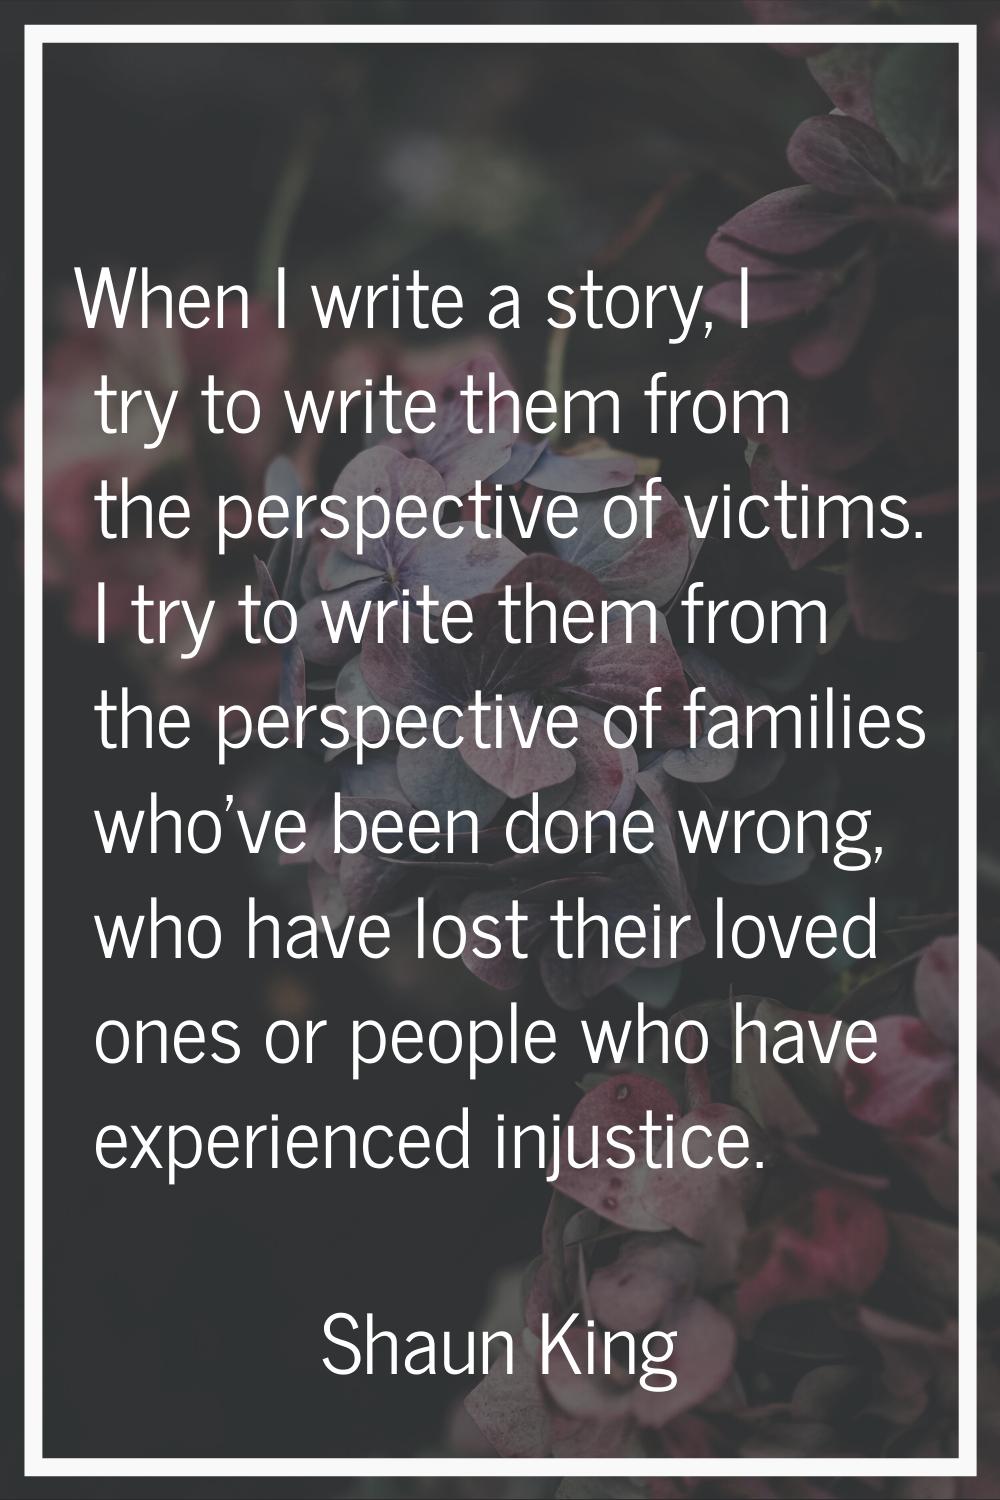 When I write a story, I try to write them from the perspective of victims. I try to write them from